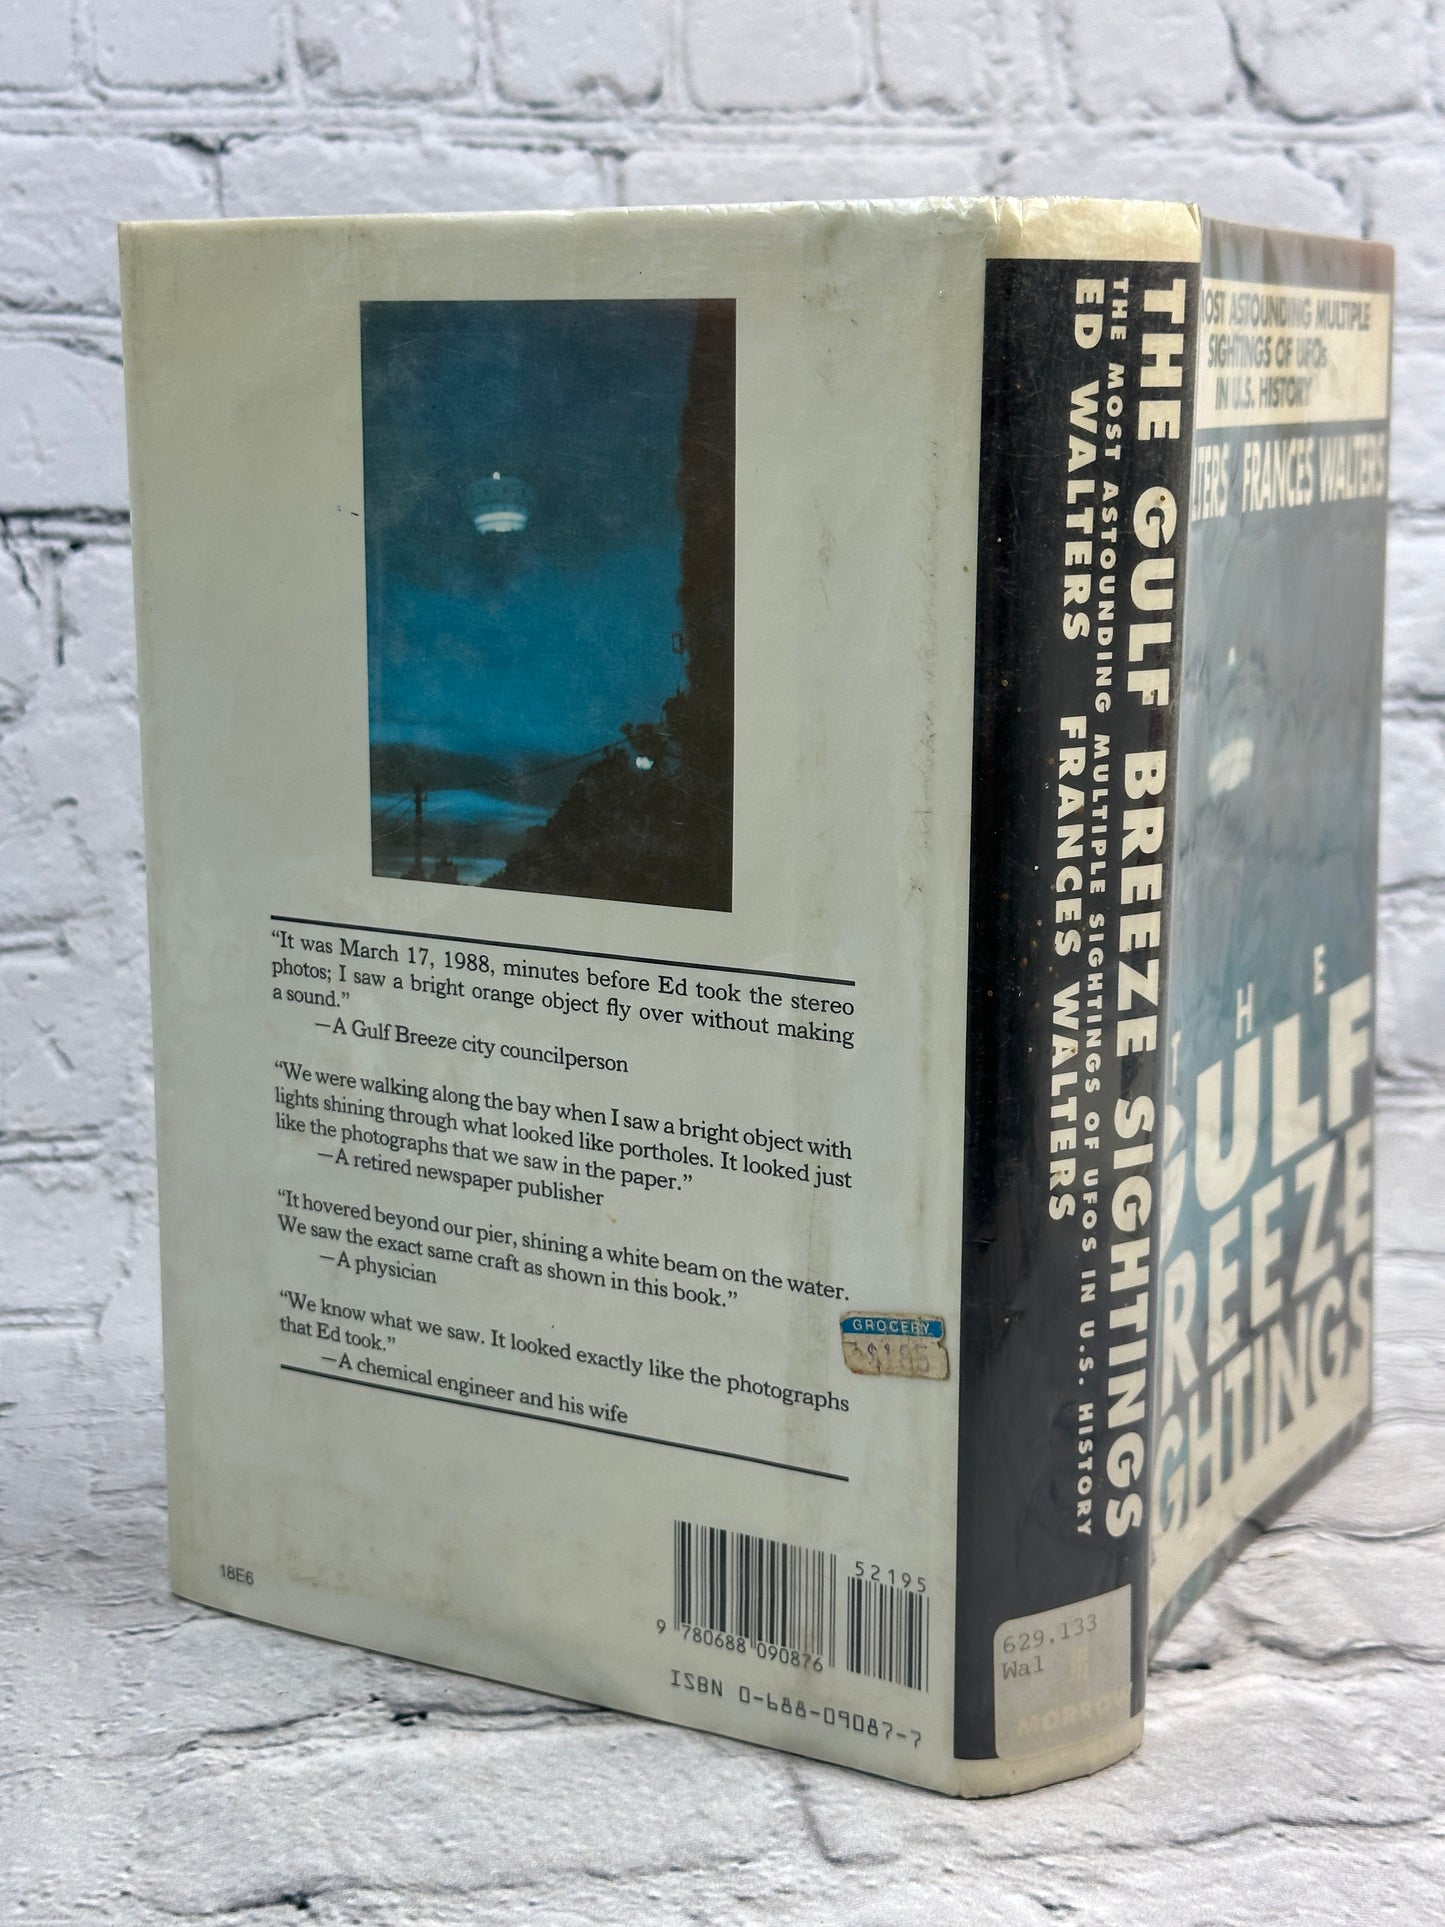 The Gulf Breeze Sightings By Ed Walters & Frances Walters [1990 · 2nd Printing]